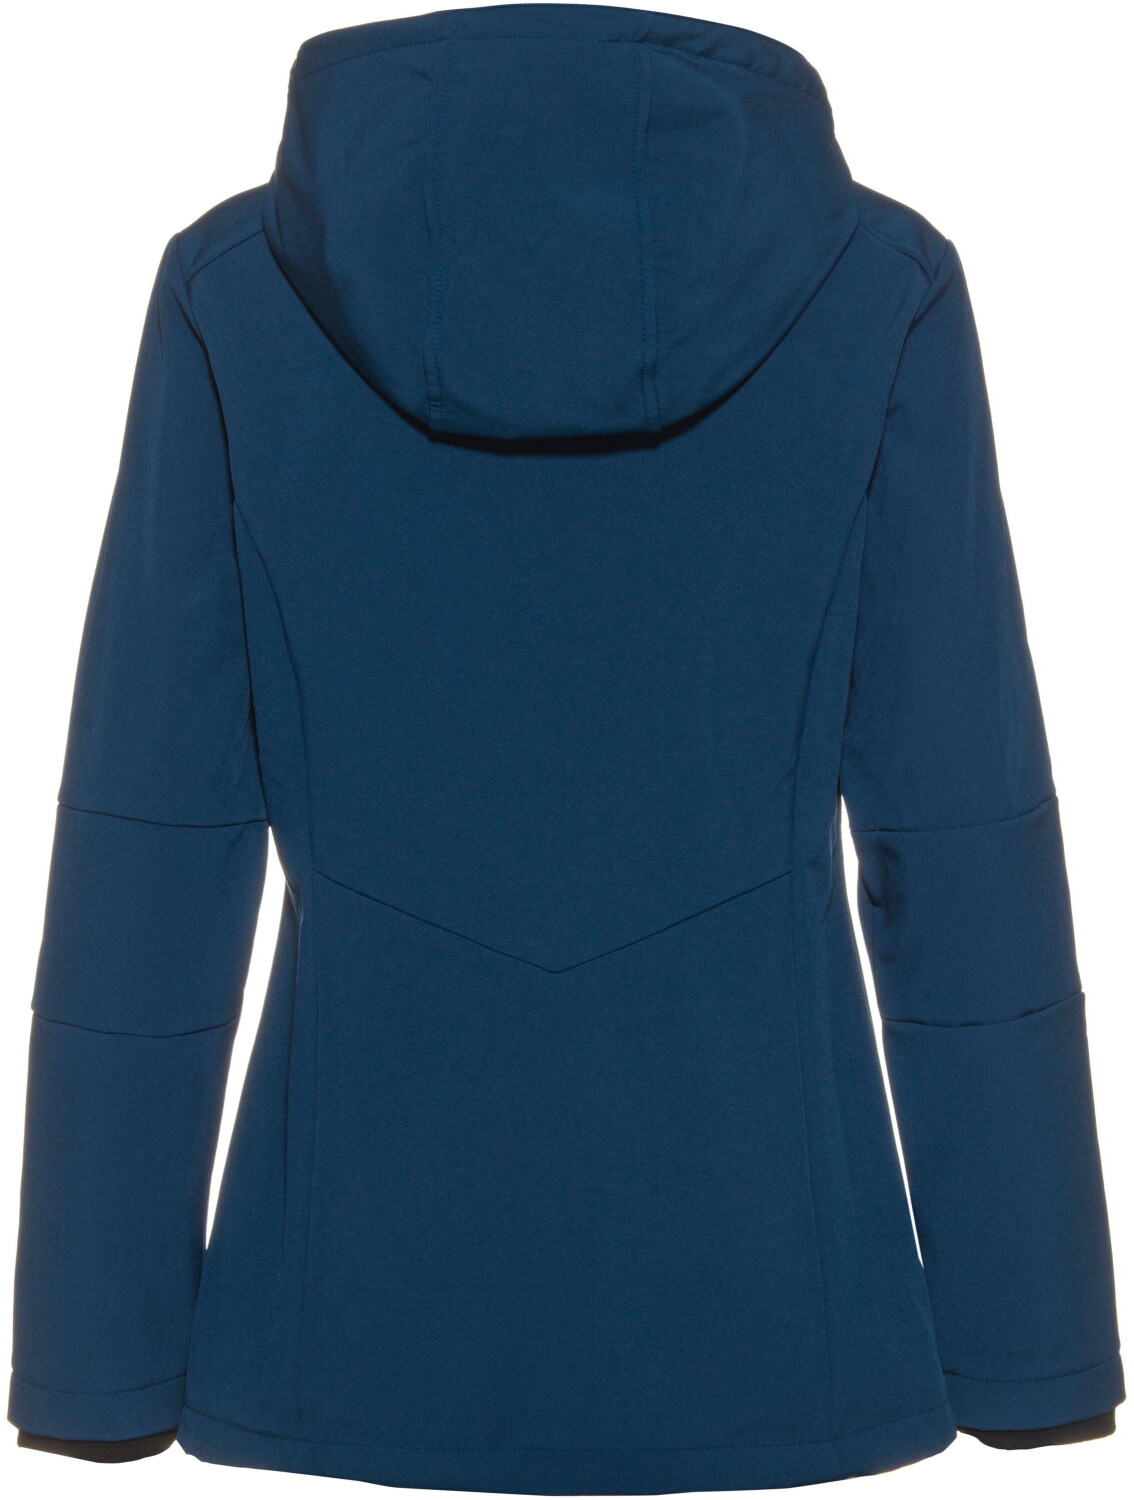 CMP Woman Softshell Jacket blue Long € blue ink/cristal Comfortable Fit With Preisvergleich ab (3A22226) bei | 39,99